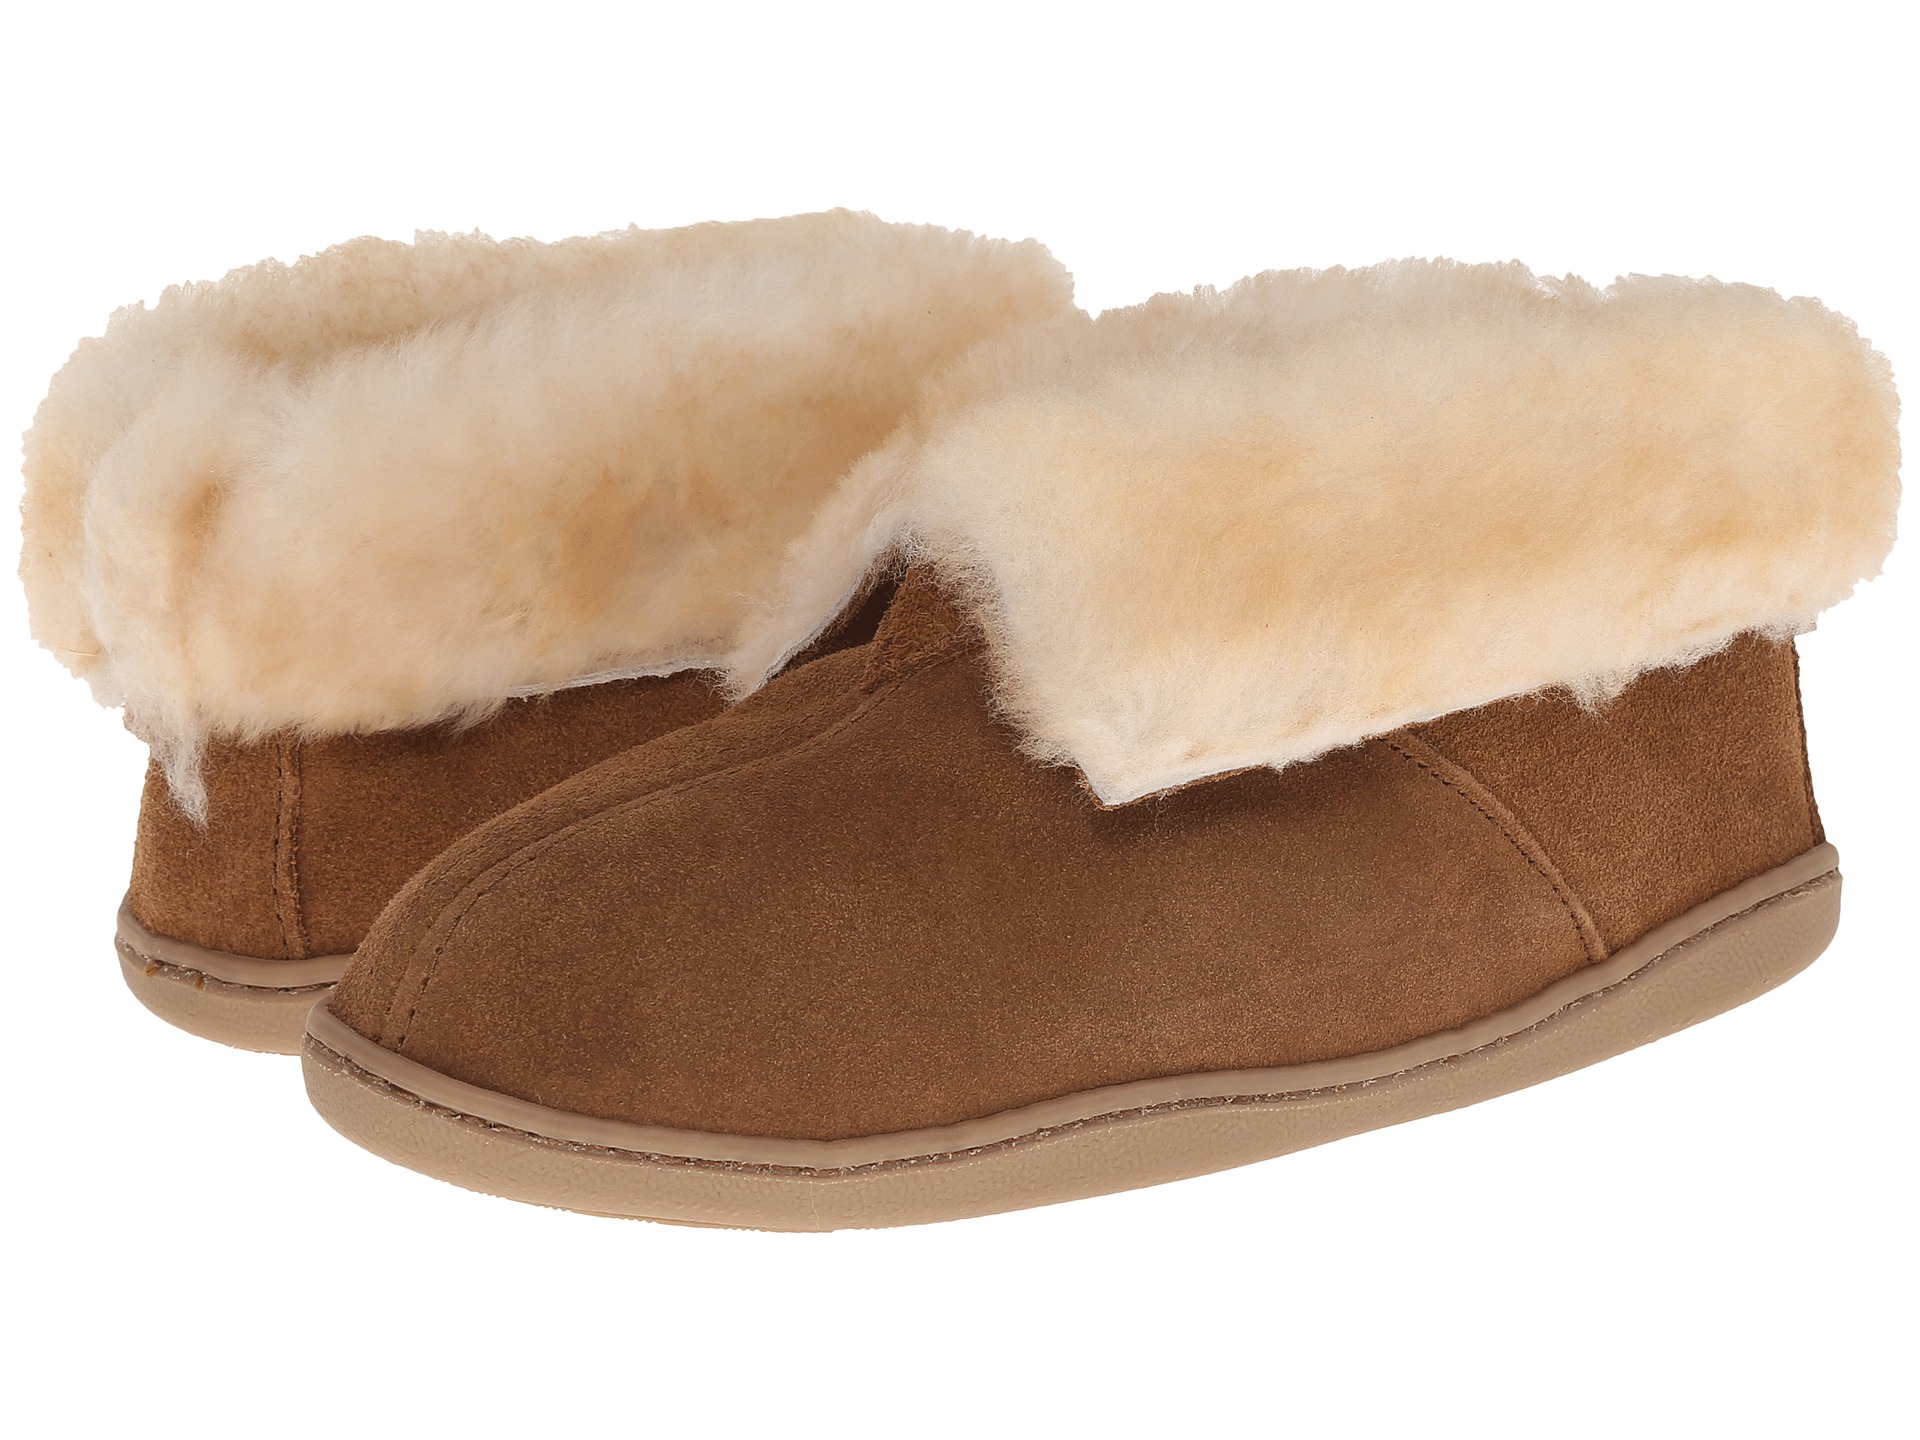 Slipper Boots, Shoes | Shipped Free at Zappos